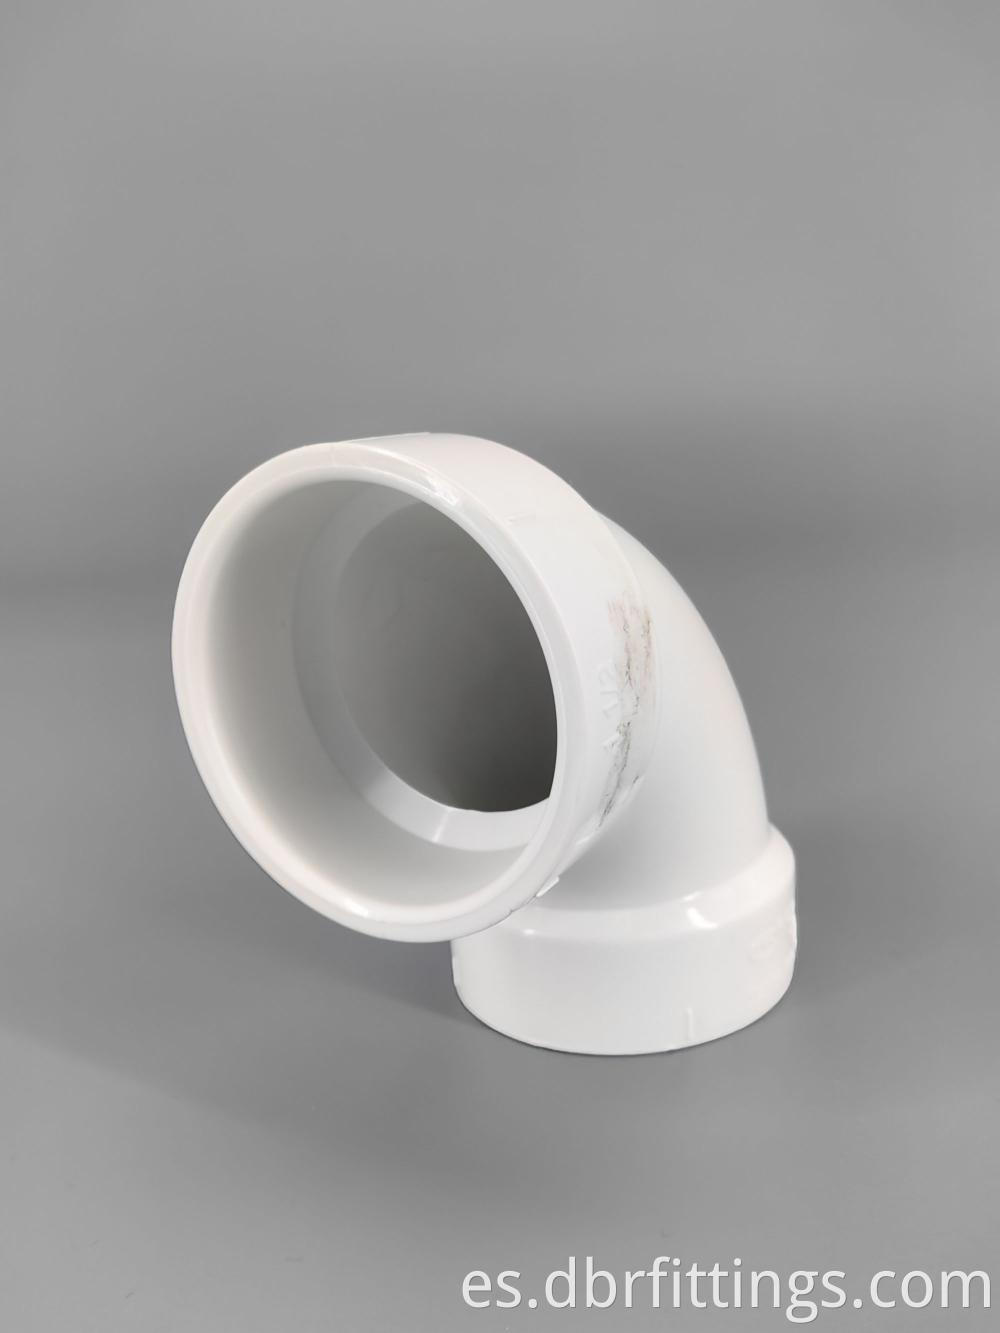 PVC Pipe fitting 90° ELBOW